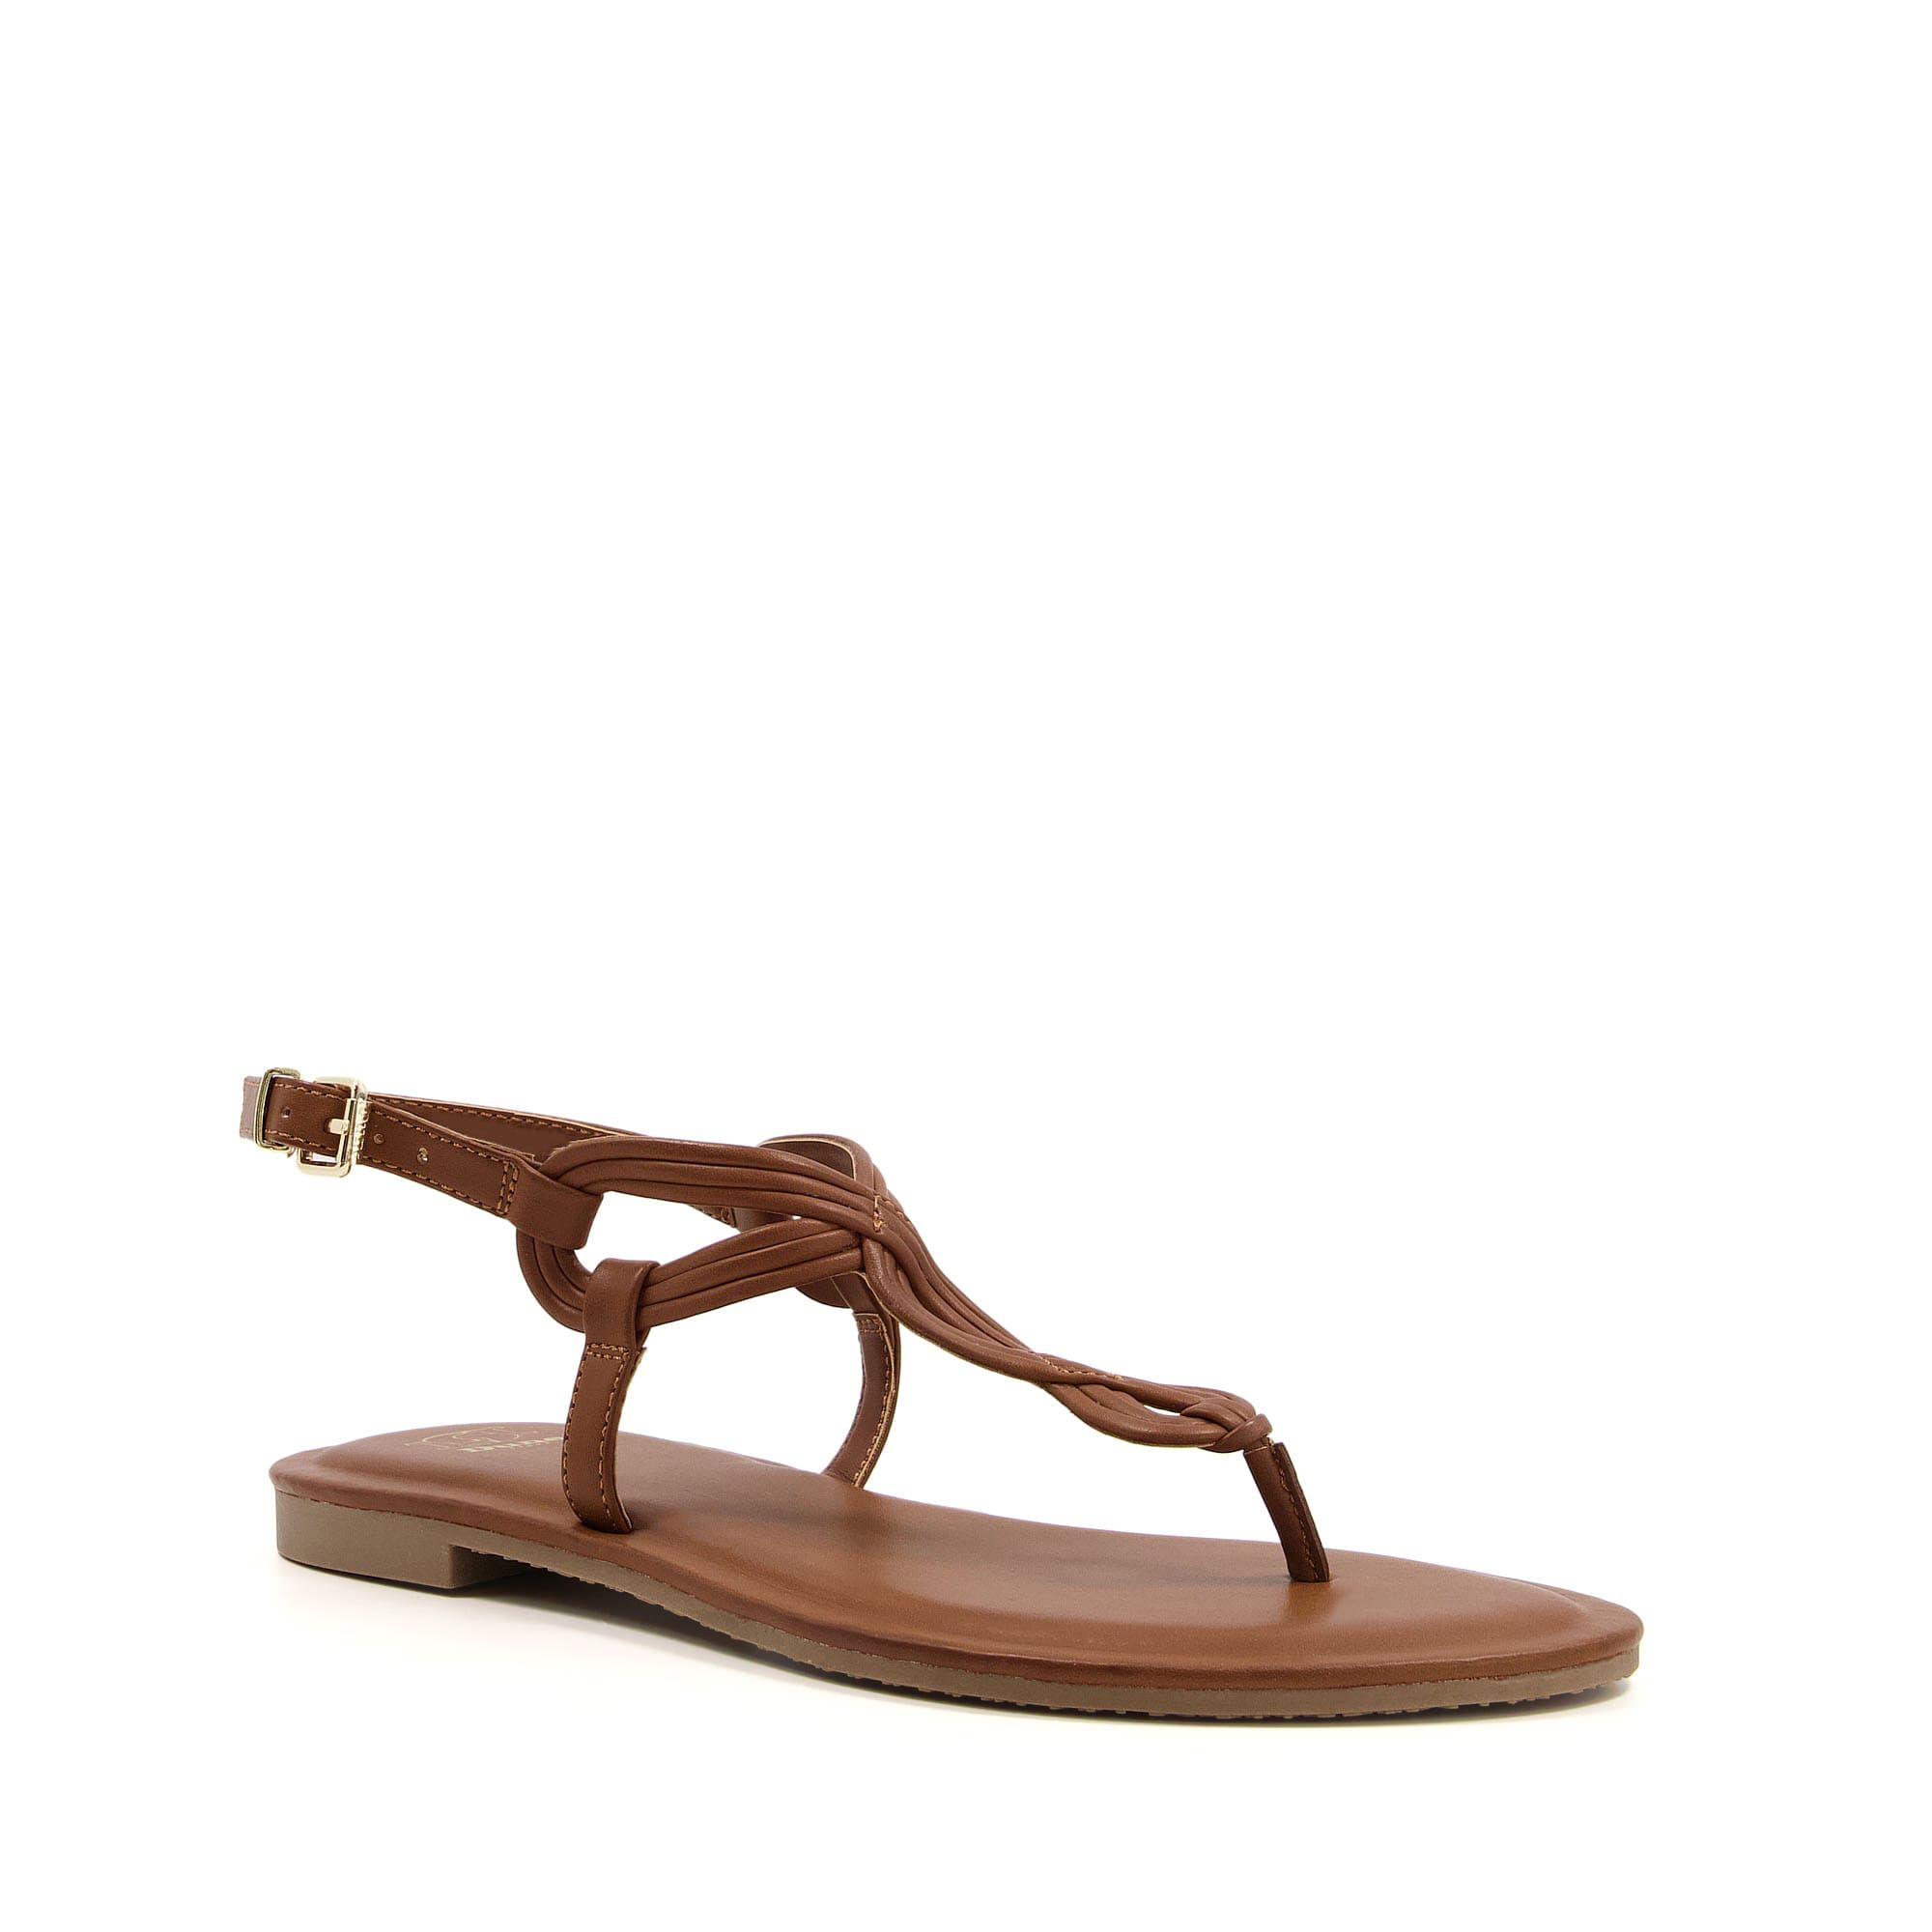 A stylish pair for home or away, our Logic sandals feature an elegant twist design in faux leather. This simple style will look great with any outfit, from floaty maxi dresses to denim shorts.